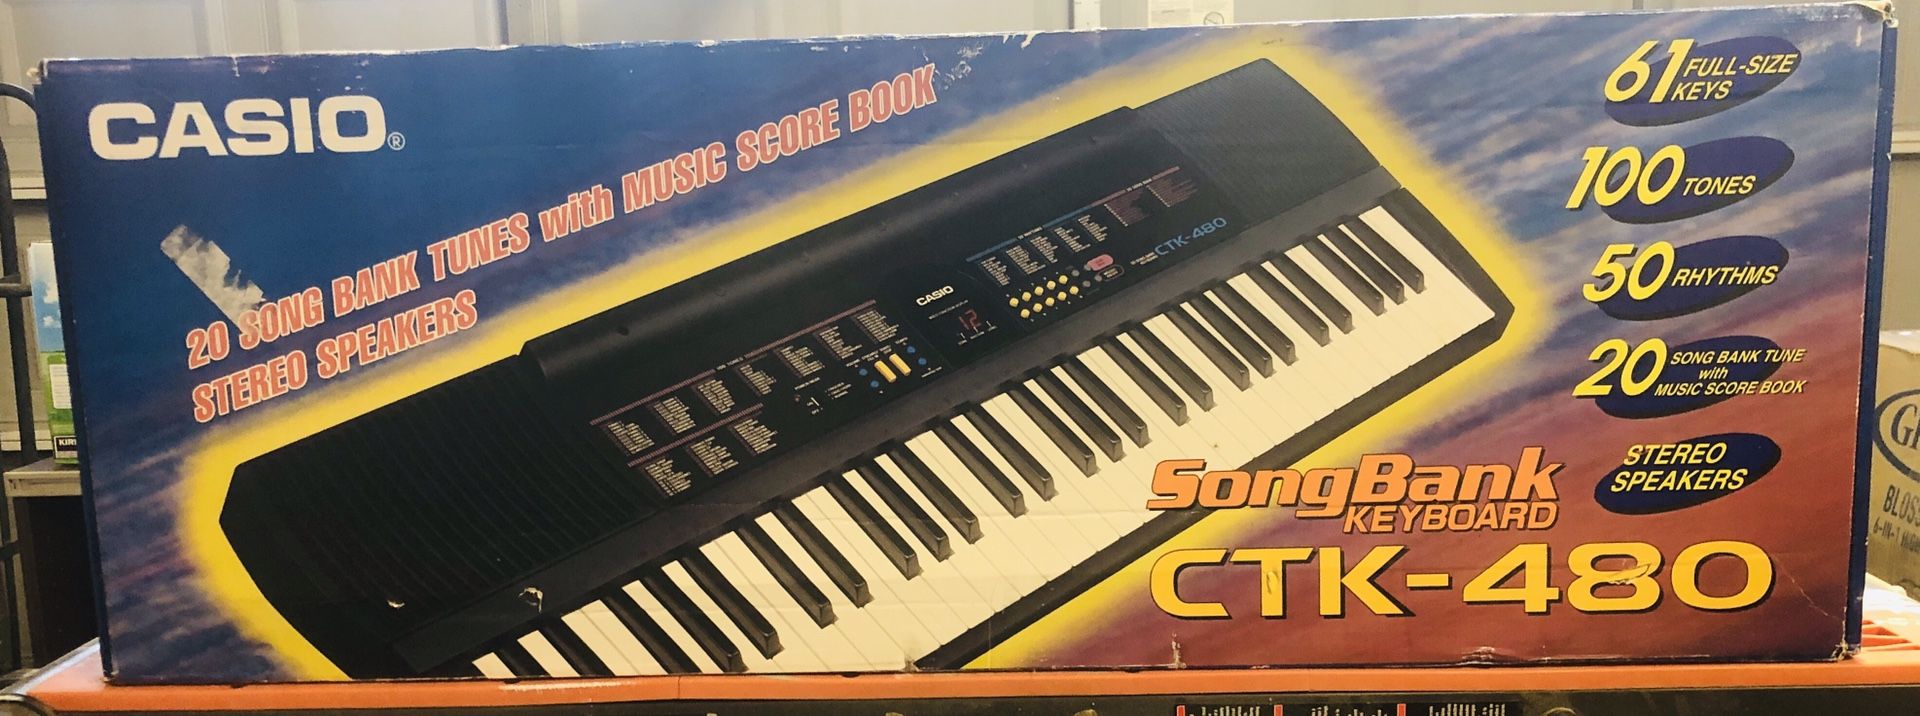 Casio song-bank keyboard CTK-480 with stand